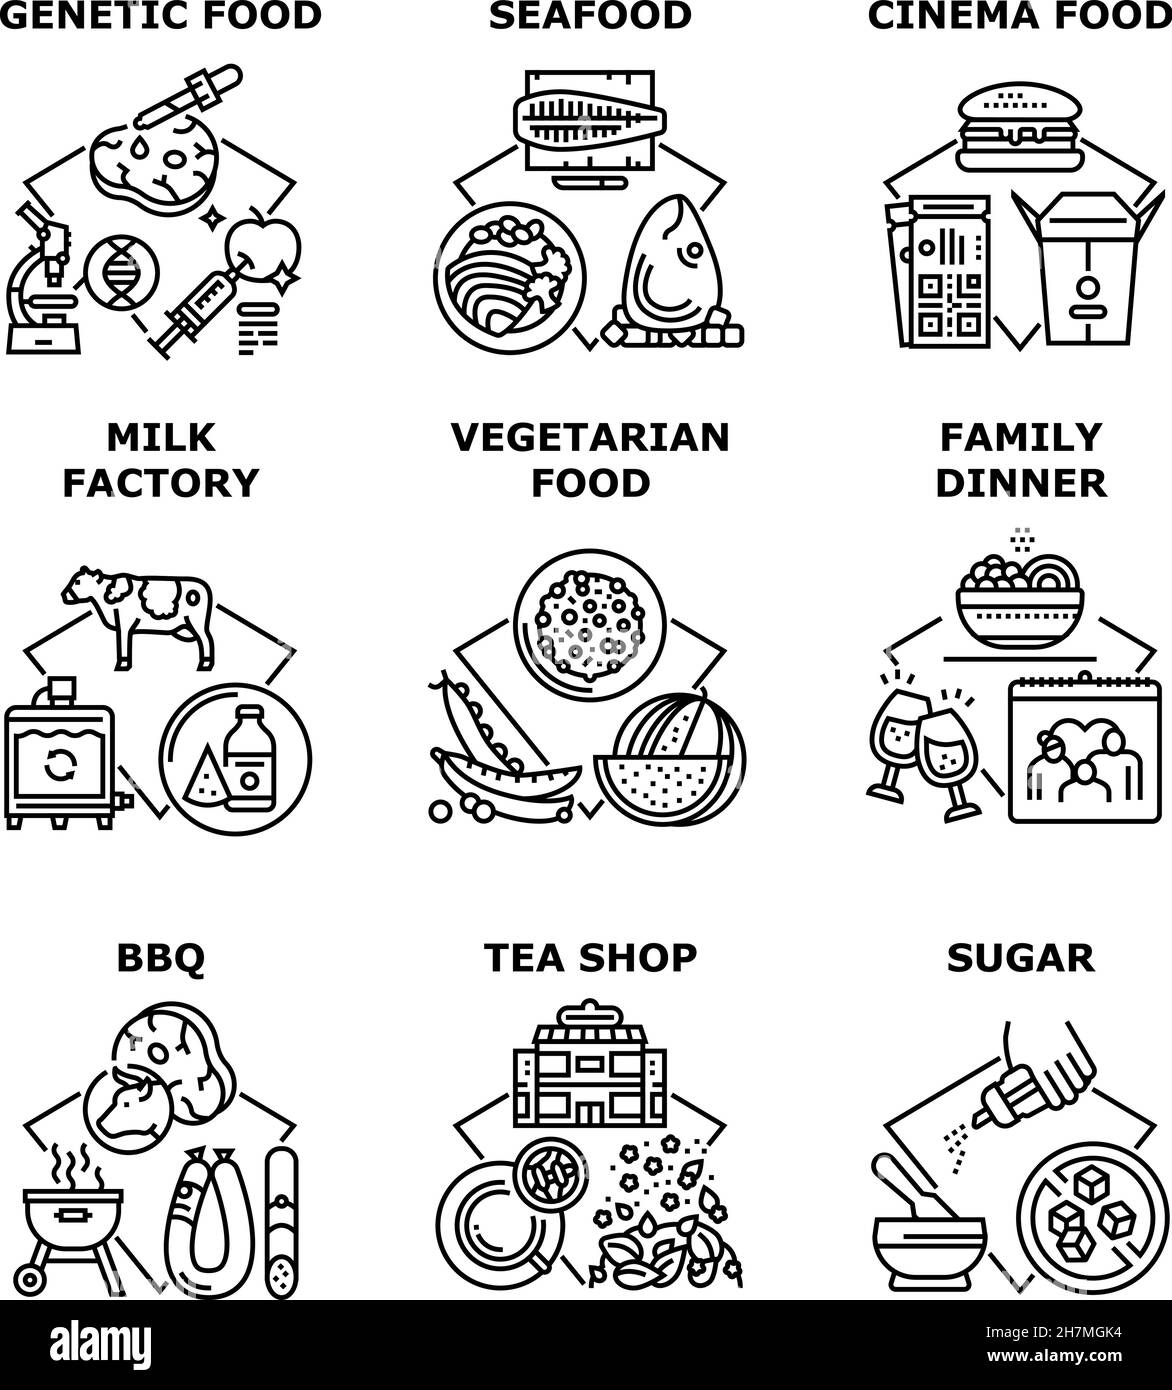 Food Family Dinner Set Icons Vector Illustrations Stock Vector